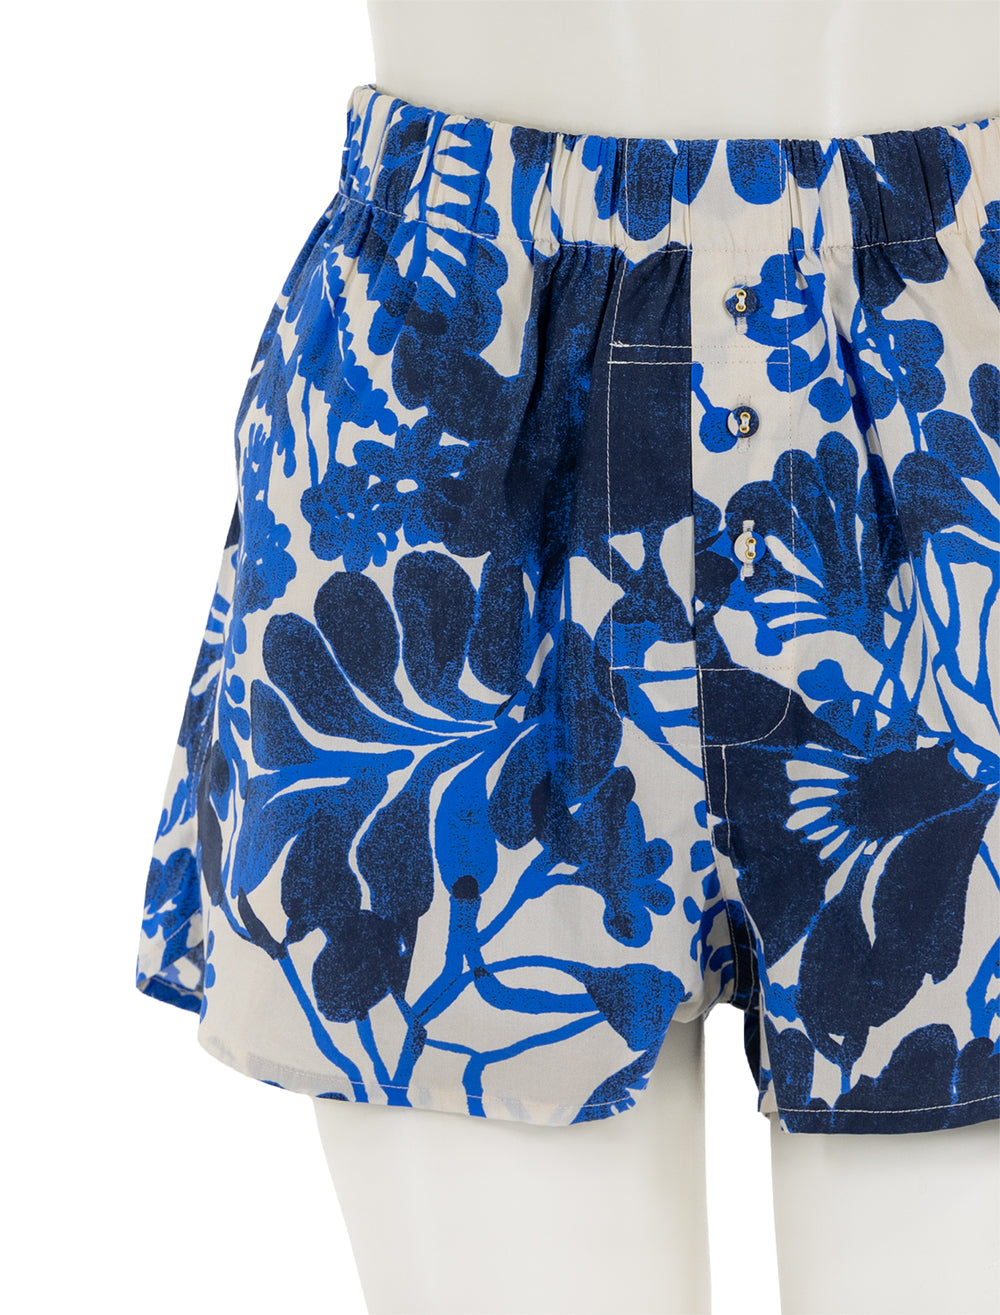 Close-up view of Cara Cara's brooks shorts in evening mill reef print.